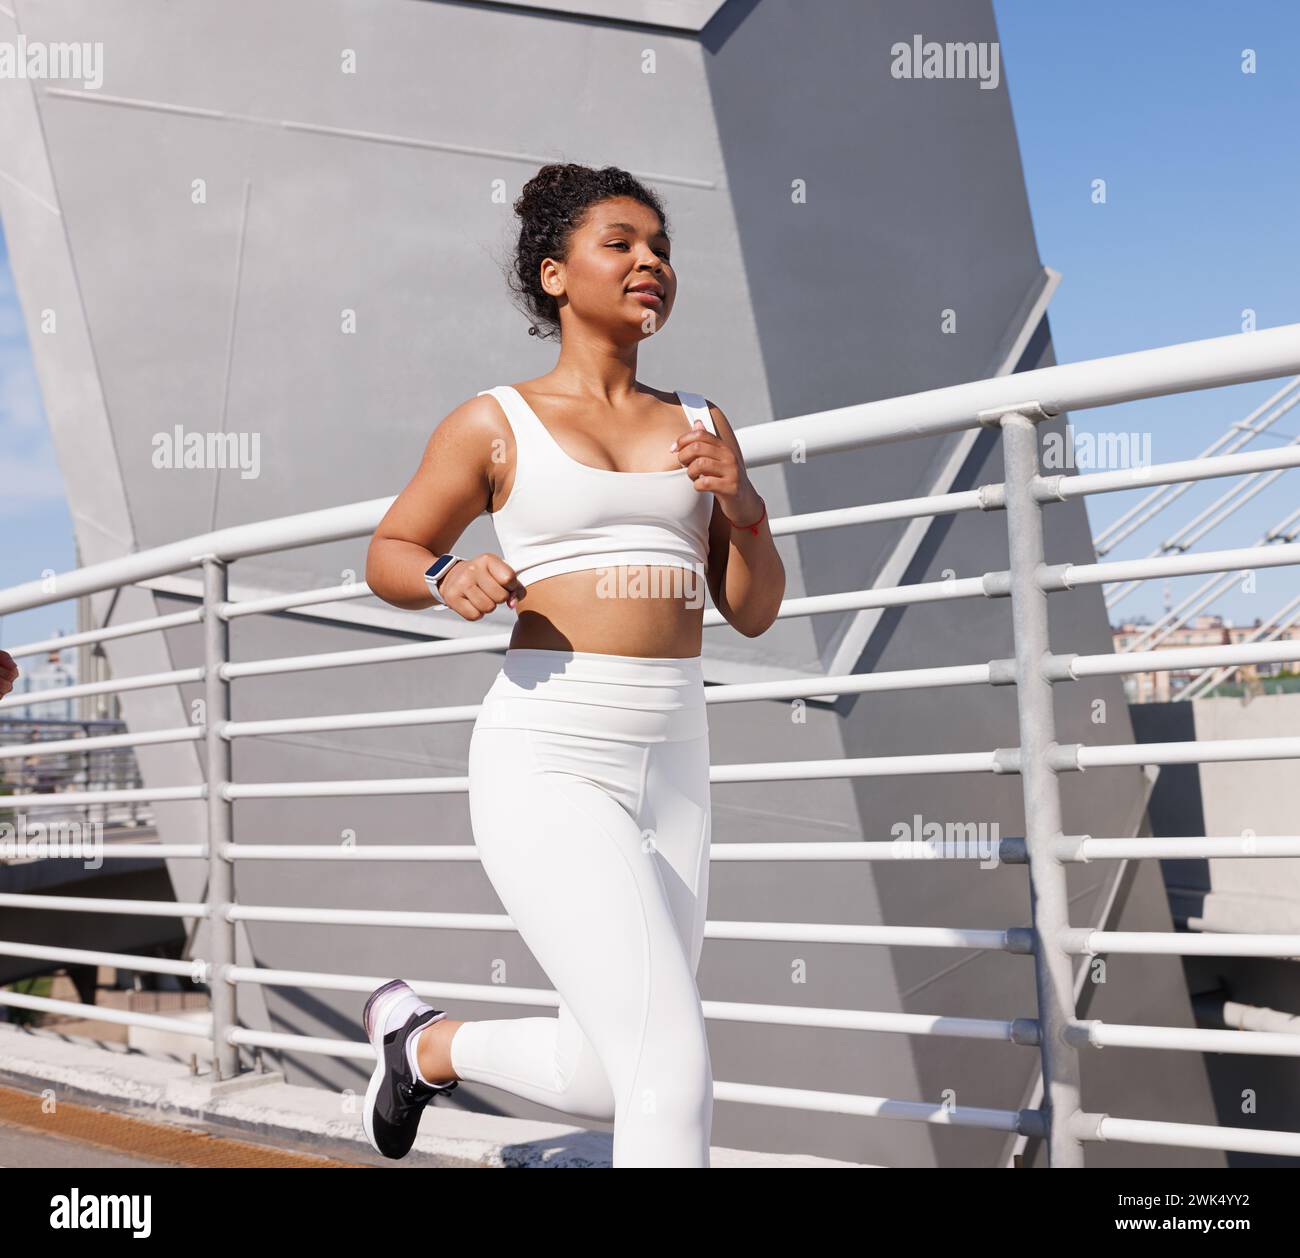 https://c8.alamy.com/comp/2WK4YY2/young-woman-in-white-sportswear-running-outdoors-on-bridge-female-in-white-fitness-attire-jogging-during-a-sunny-day-2WK4YY2.jpg